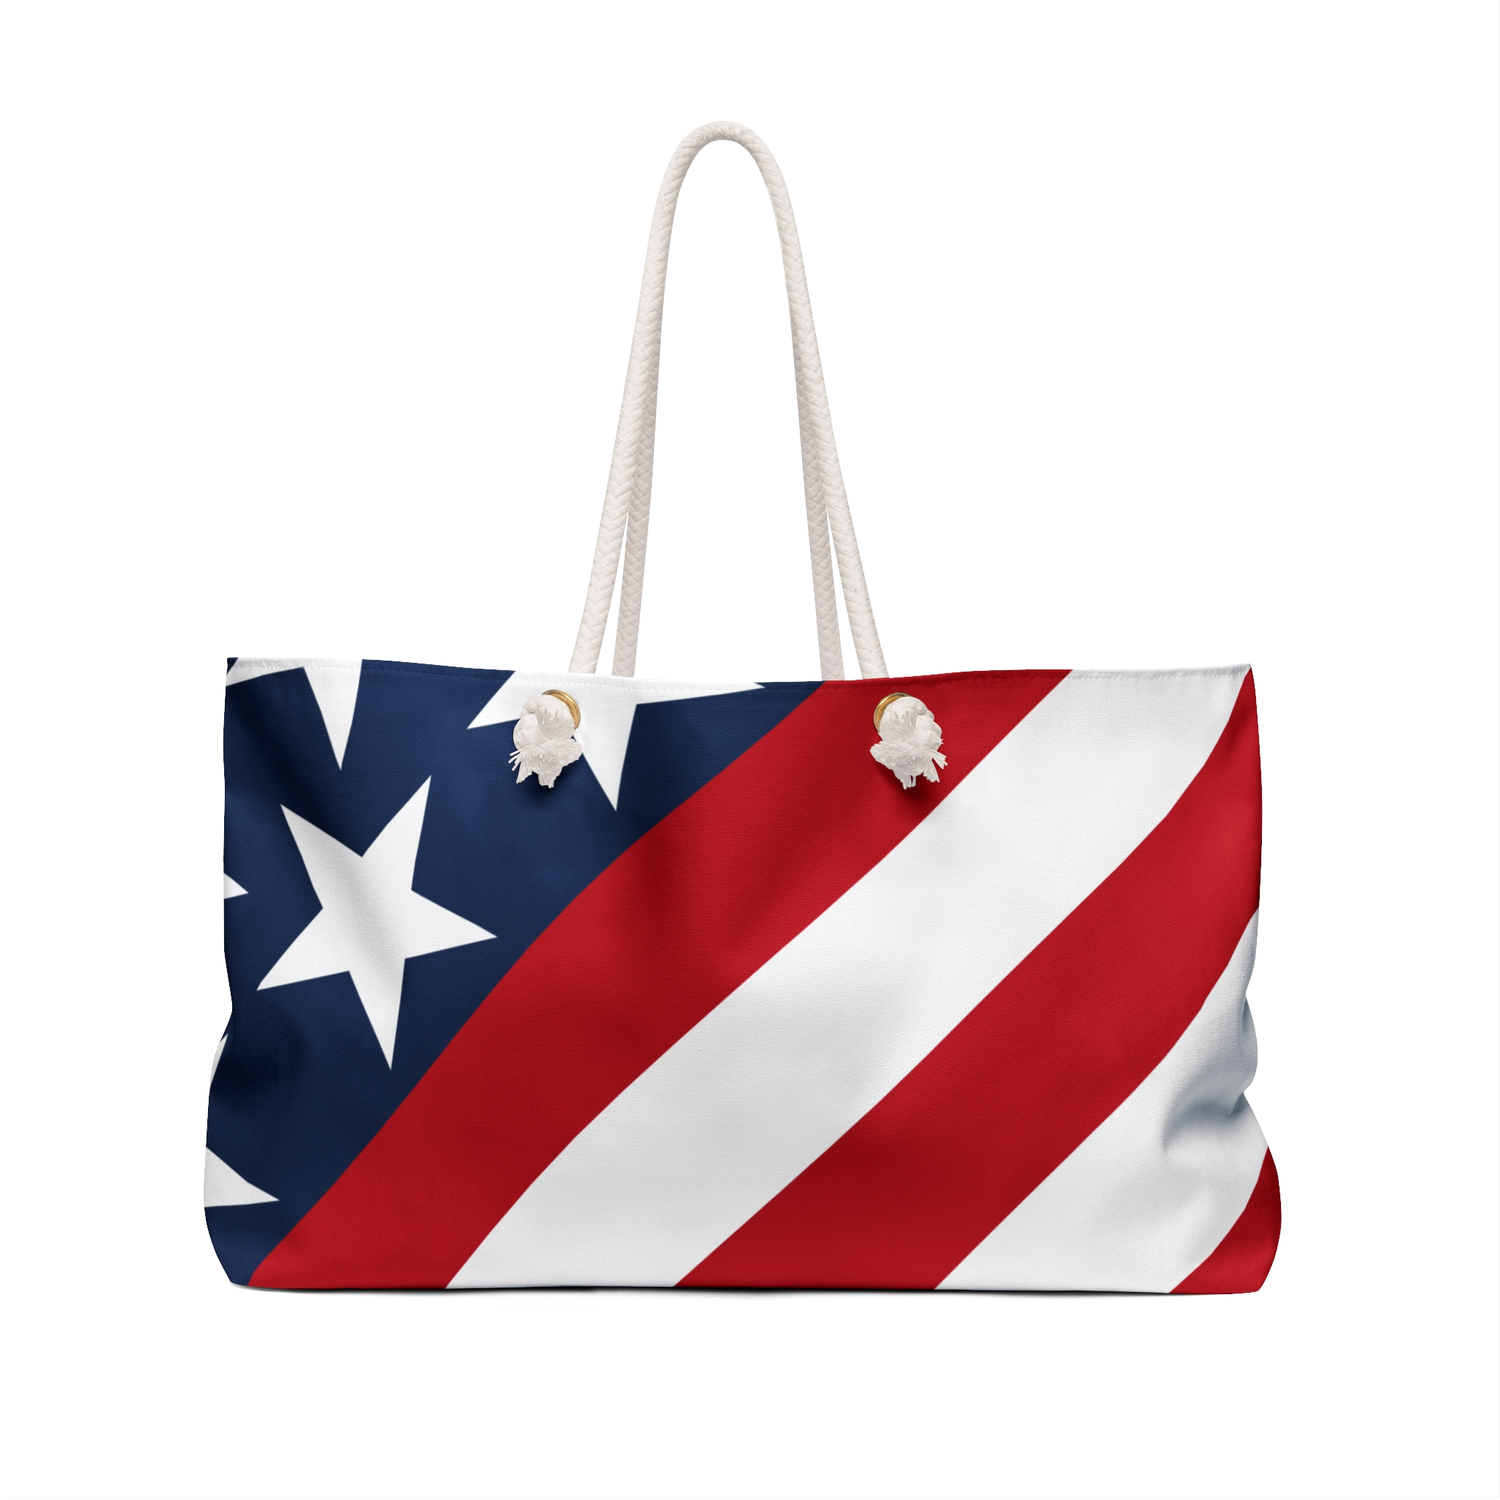 Blaine Apparel Bags - Collection of Tote Bags in various designs